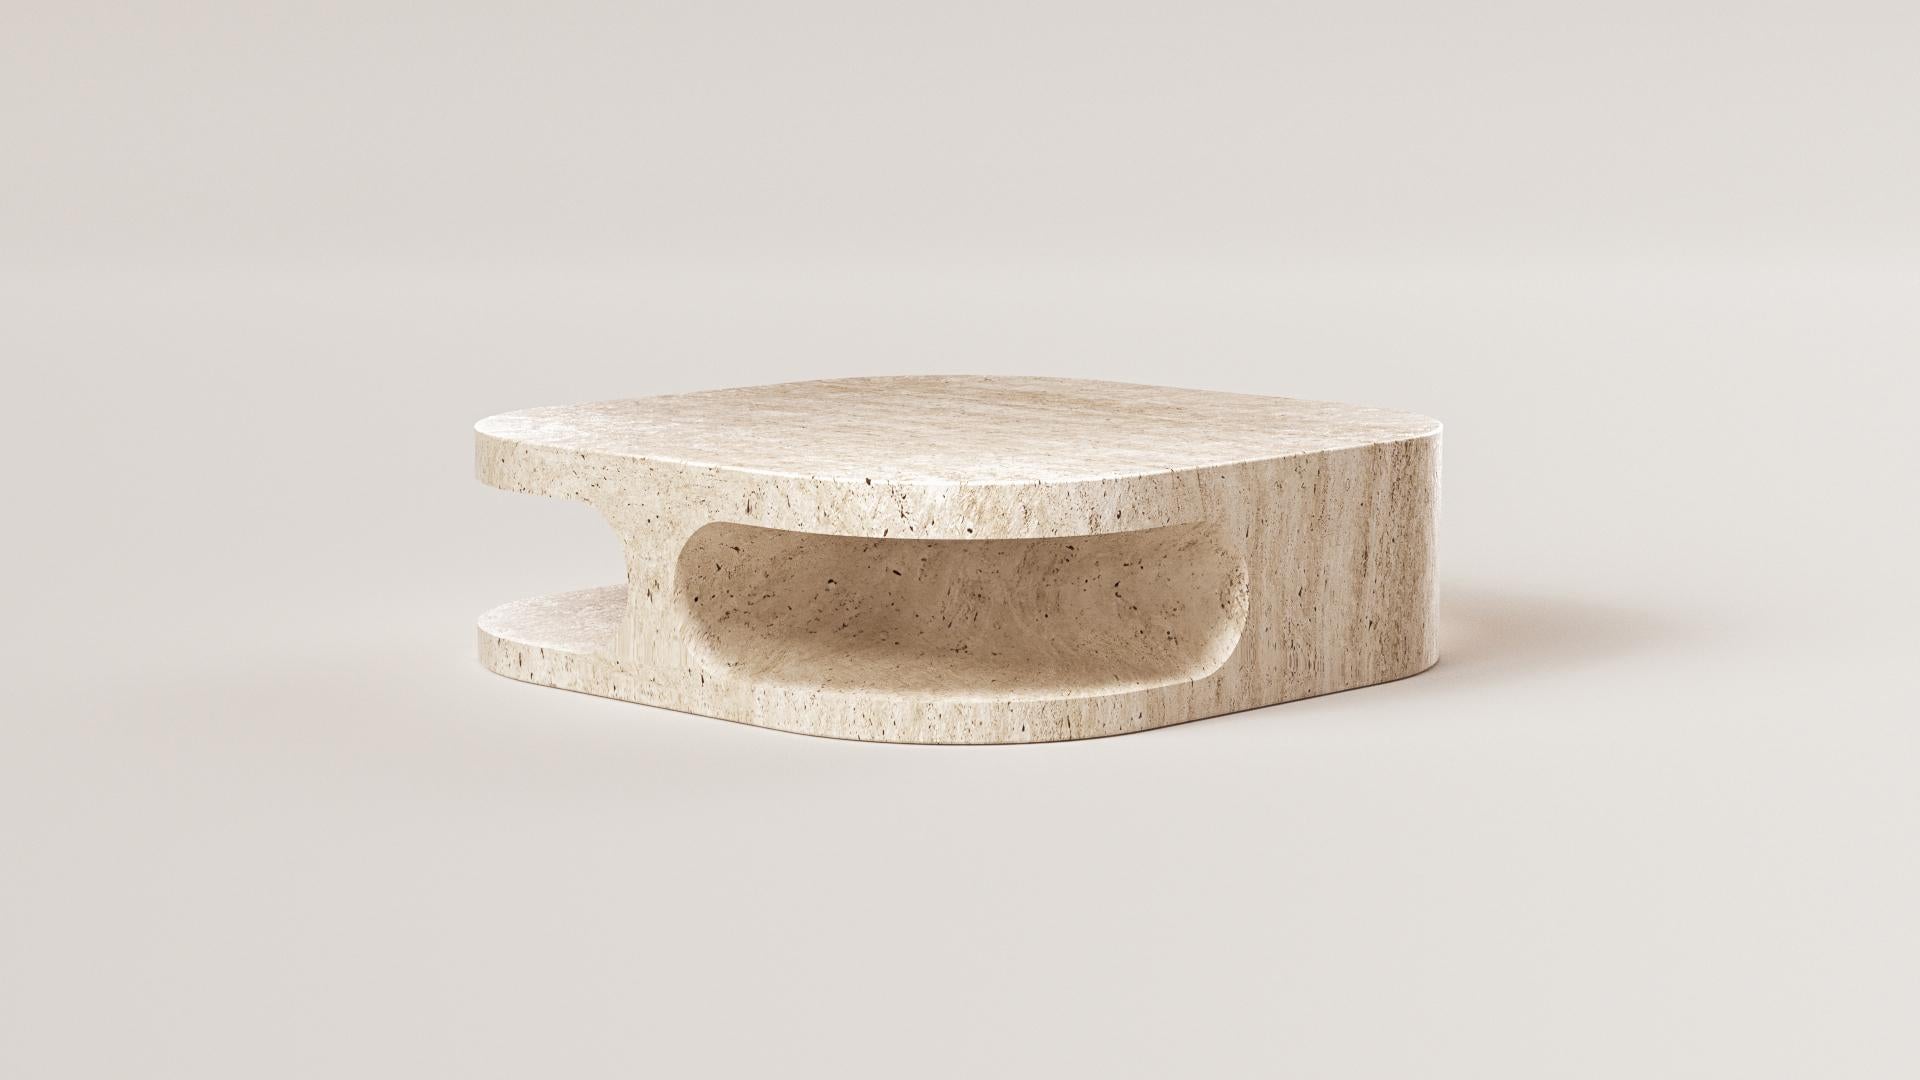 Sculpt Coffee Table by Arthur Vallin
Dimensions: W 91 x D 91 x H 35 cm 
Materials: Travertine
Customizable shape and dimensions on demand.

French Artist, Designer, and Creative Director Arthur Vallin hold a master’s degree in Art Direction from the